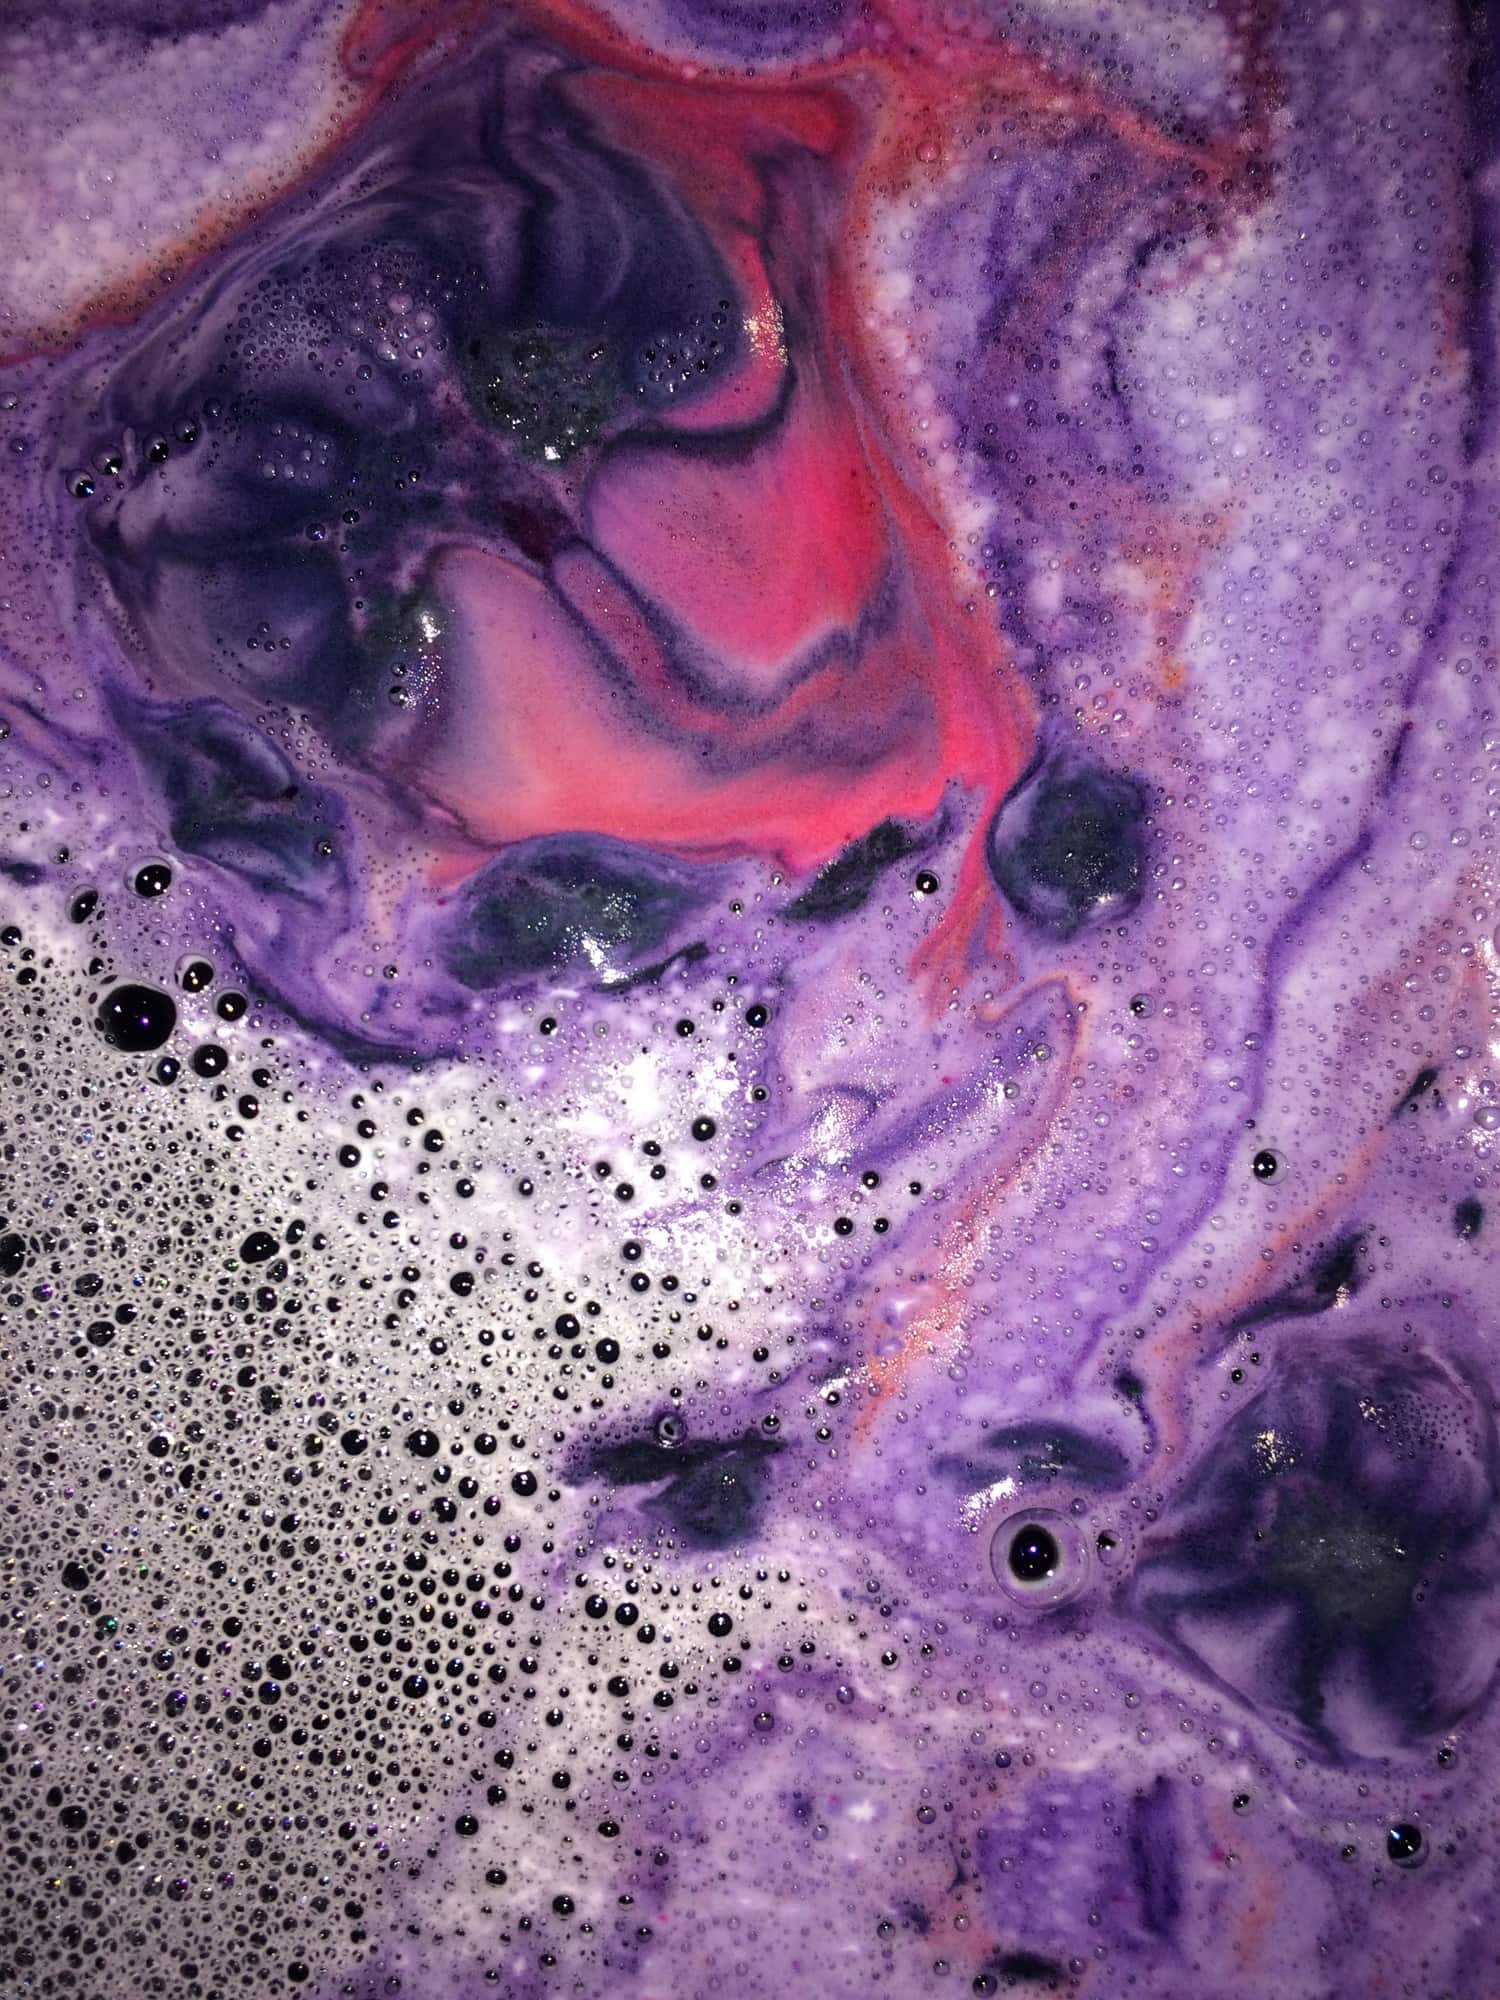 What Is The Bath Bomb Sticky Residue After A Bath